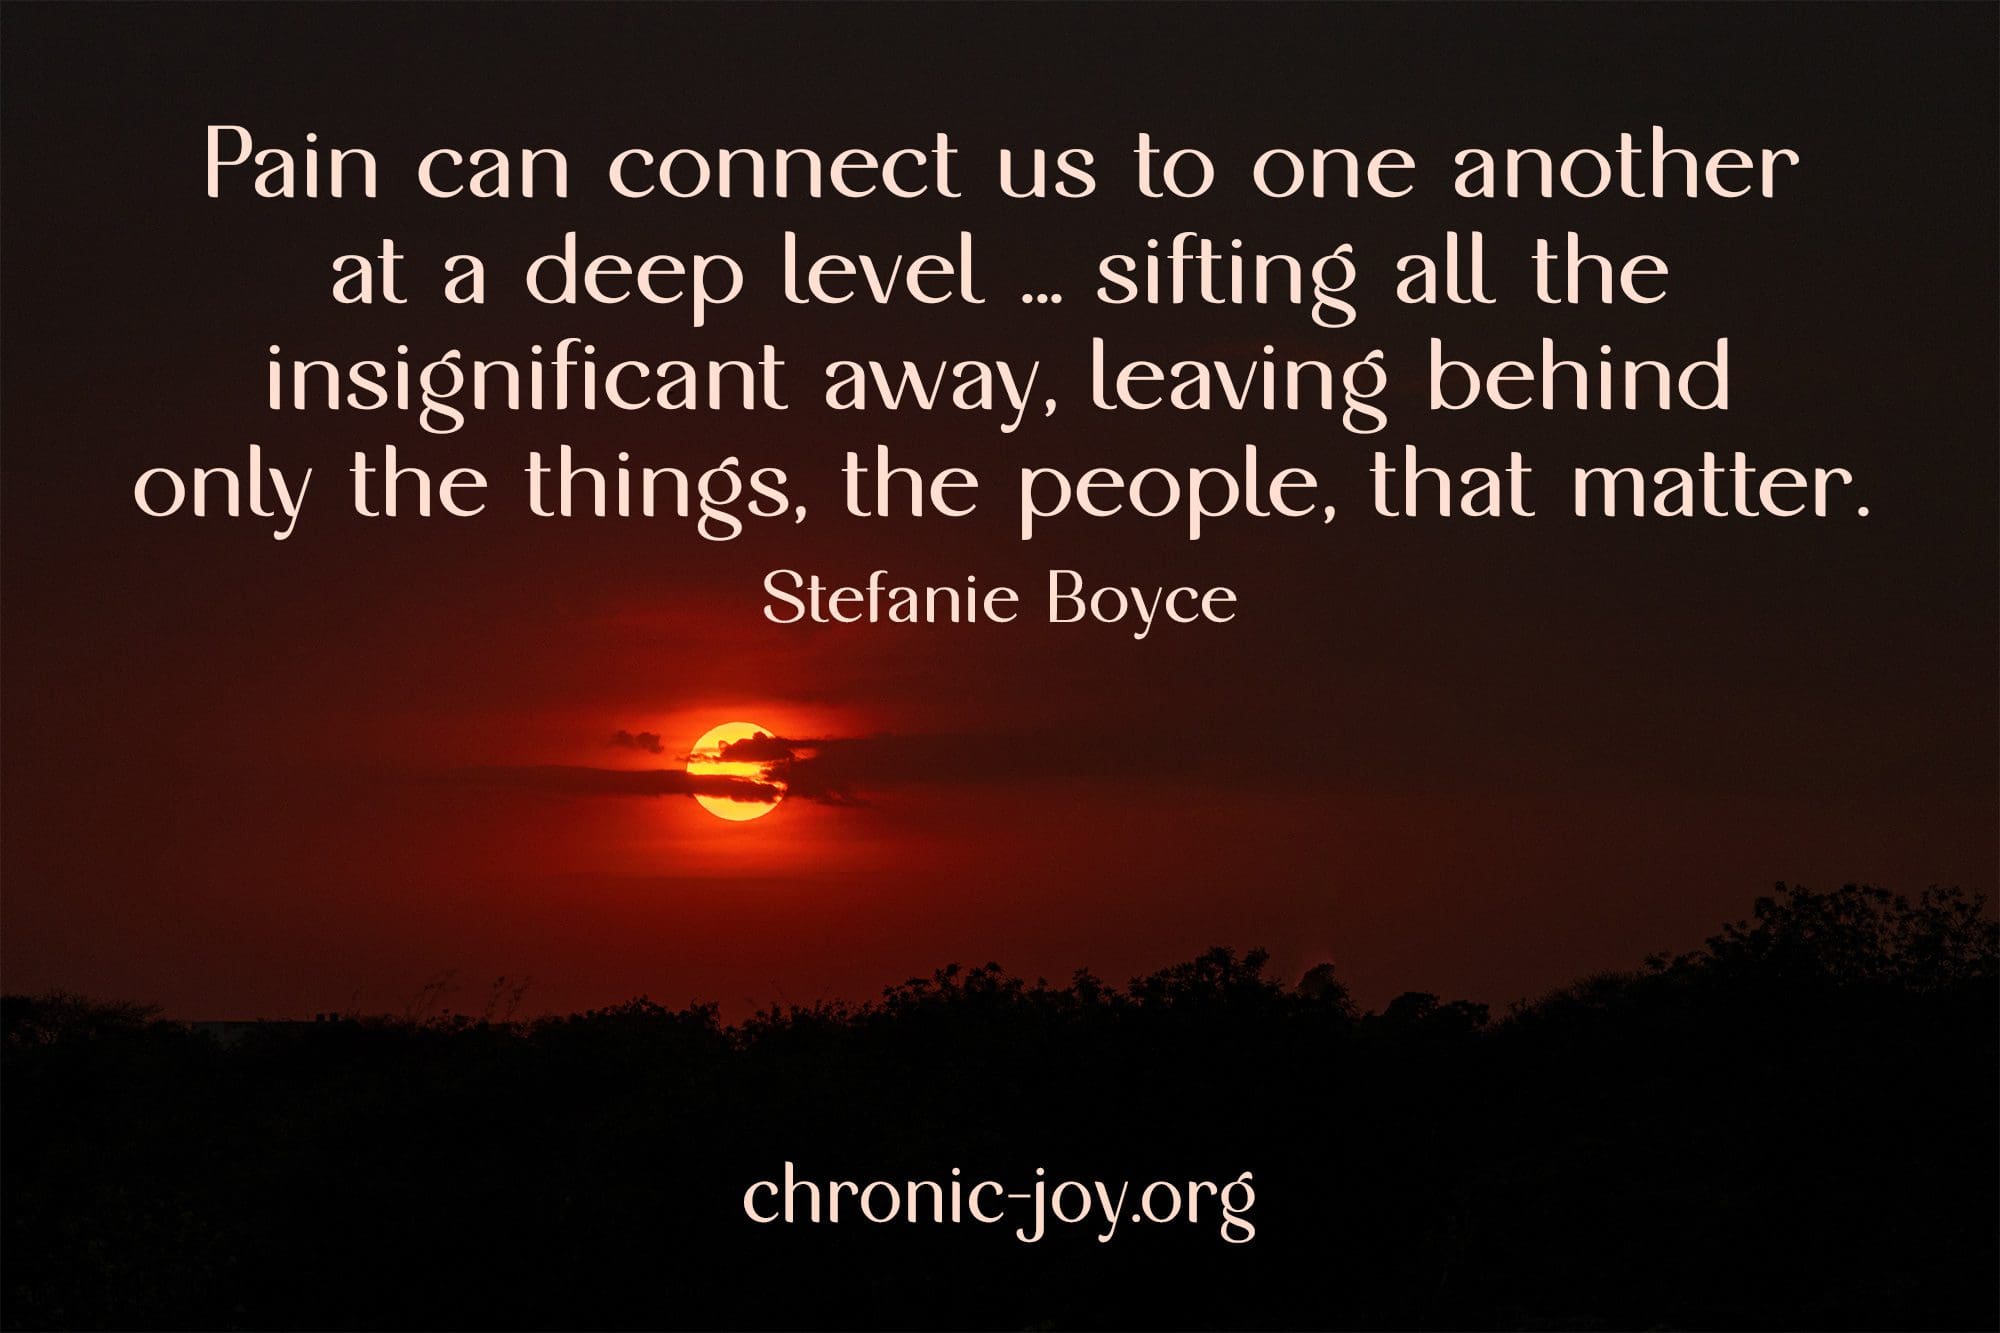 "Pain can connect us to one another at a deep level ... sifting all the insignificant away, leaving behind only the things, the people, that matter." Stefanie Boyce